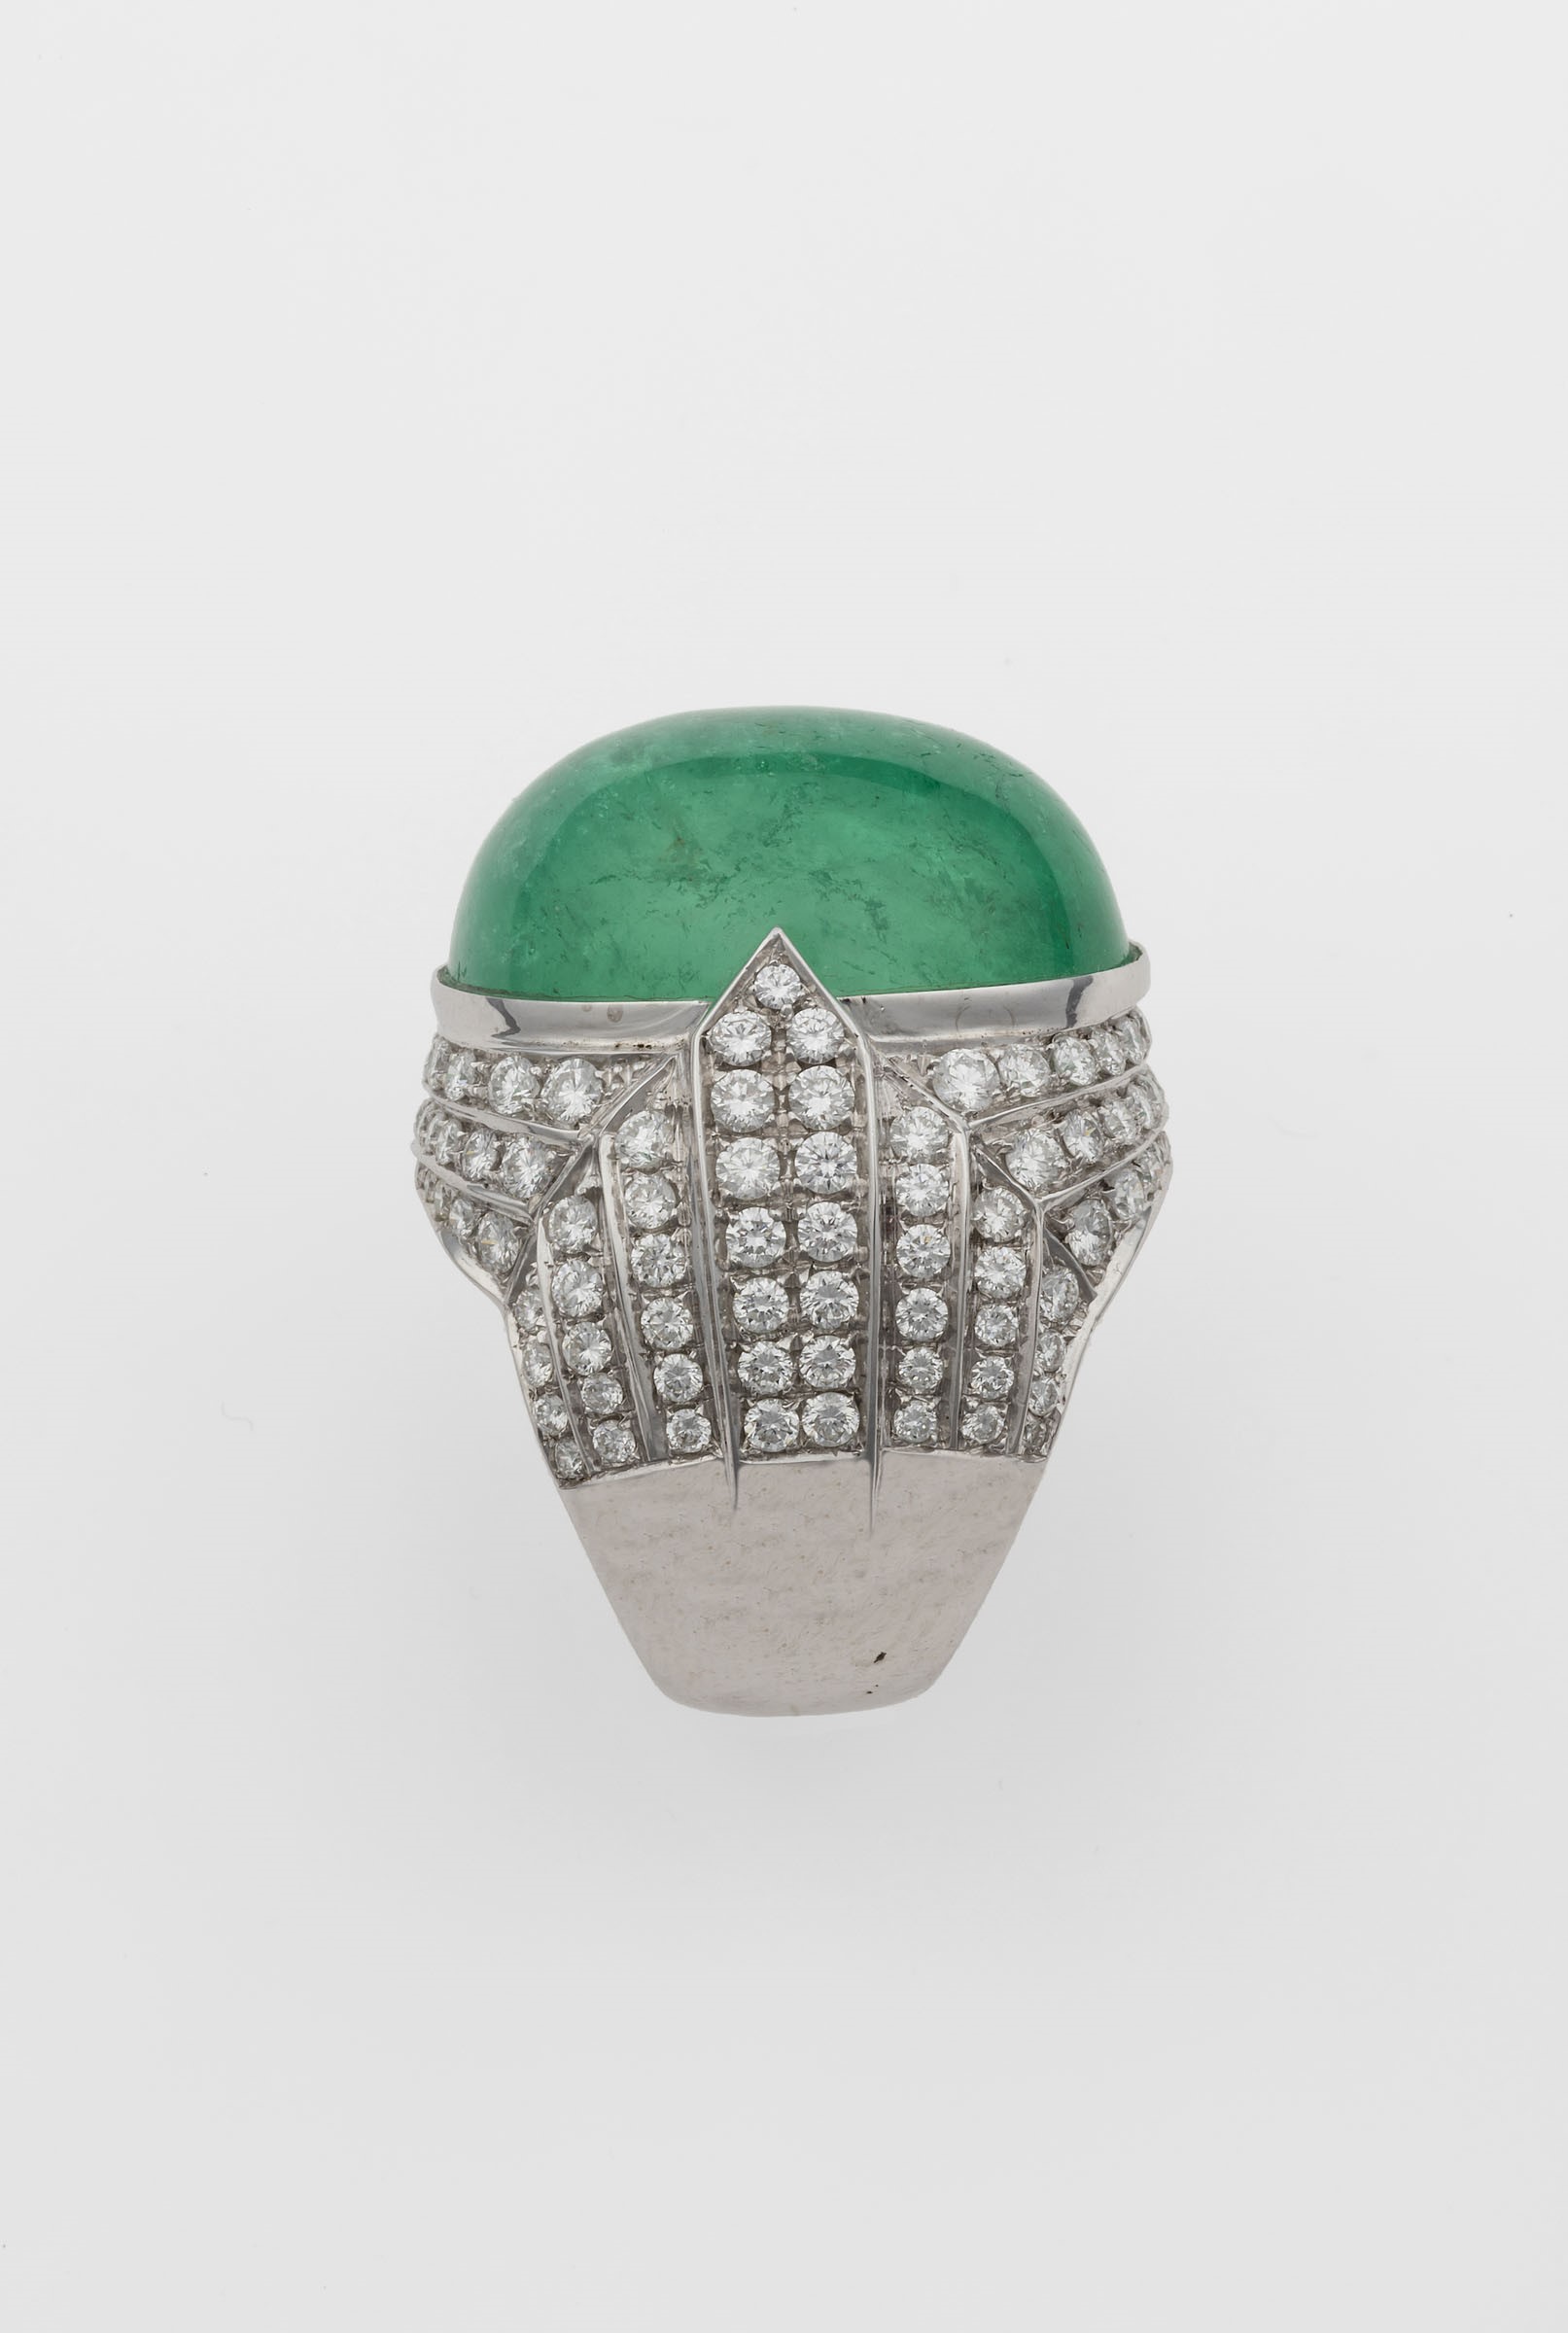 Colombian emerald and diamond ring - montatura in oro bianco 750/1000 - - Image 2 of 2